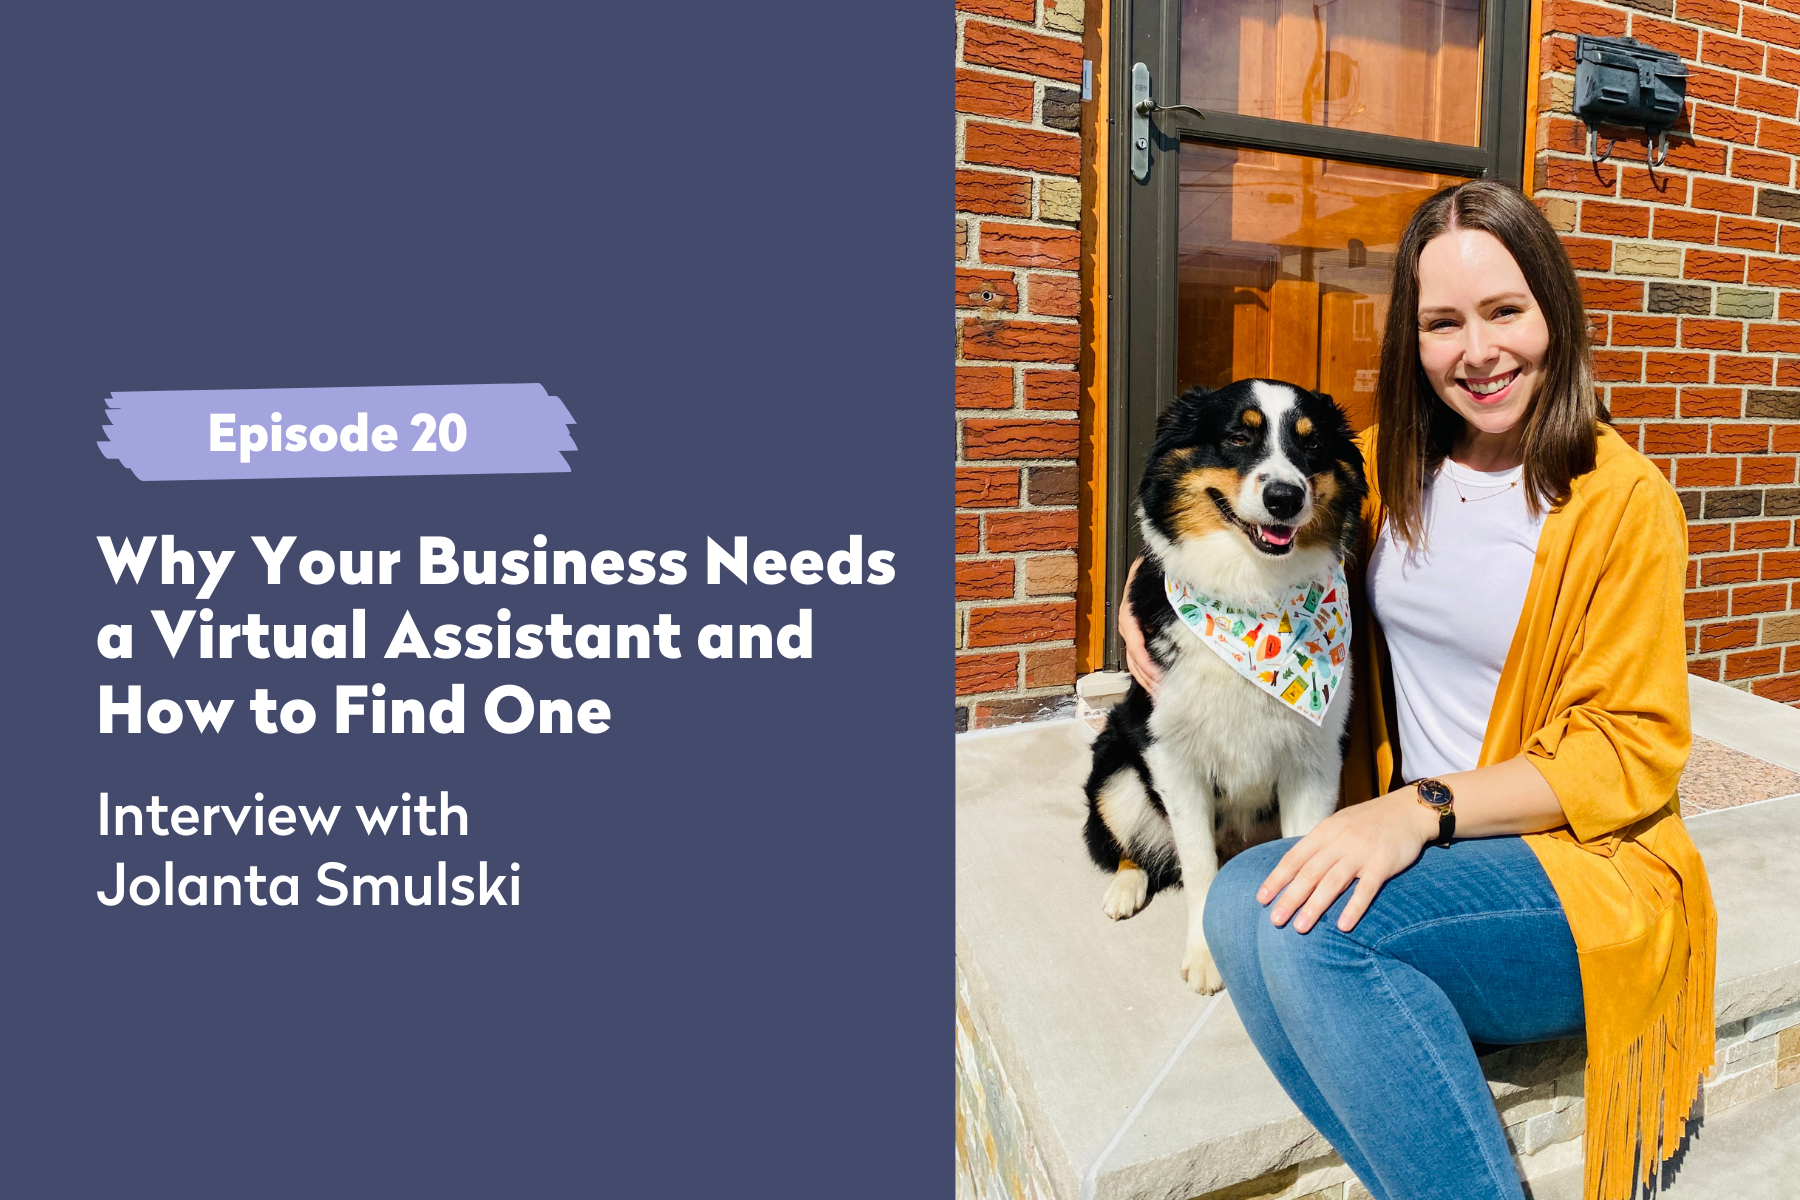 Episode 20 | Why Your Business Needs a Virtual Assistant and How to Find One